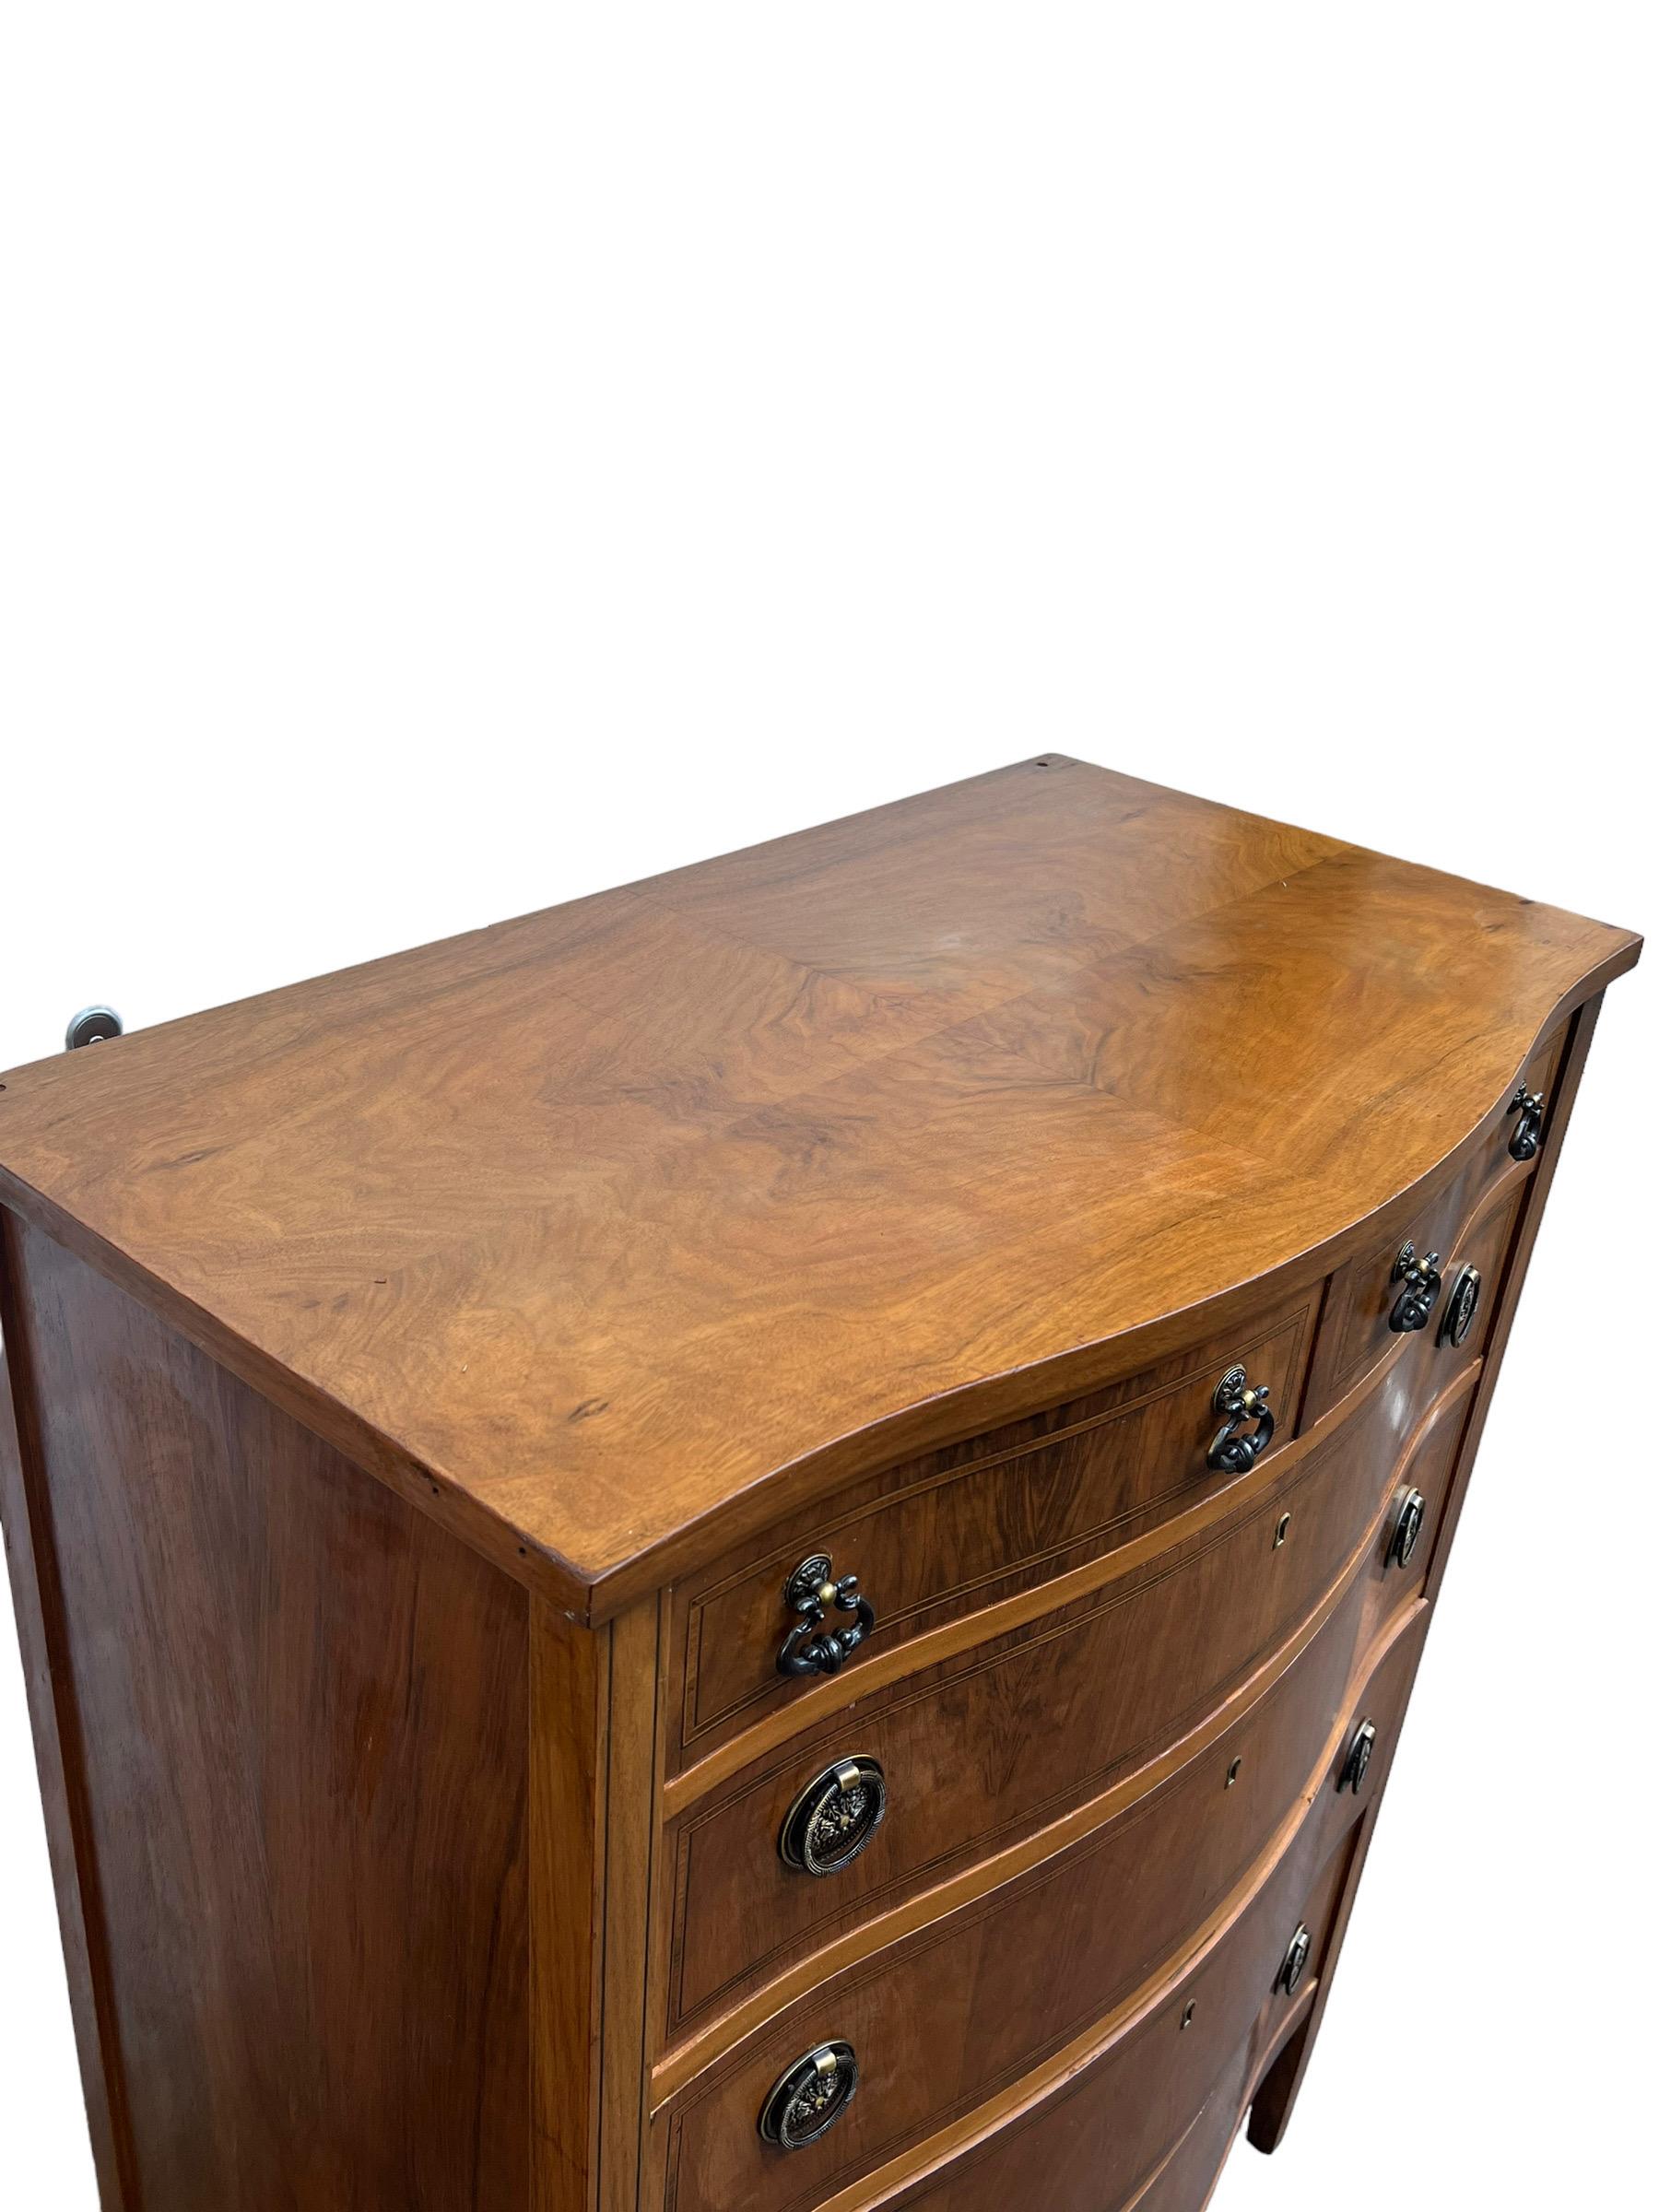 Late 20th Century Antique 6 Drawer Dresser Dovetail Solid Wood Drawers. With Burl Veneer For Sale